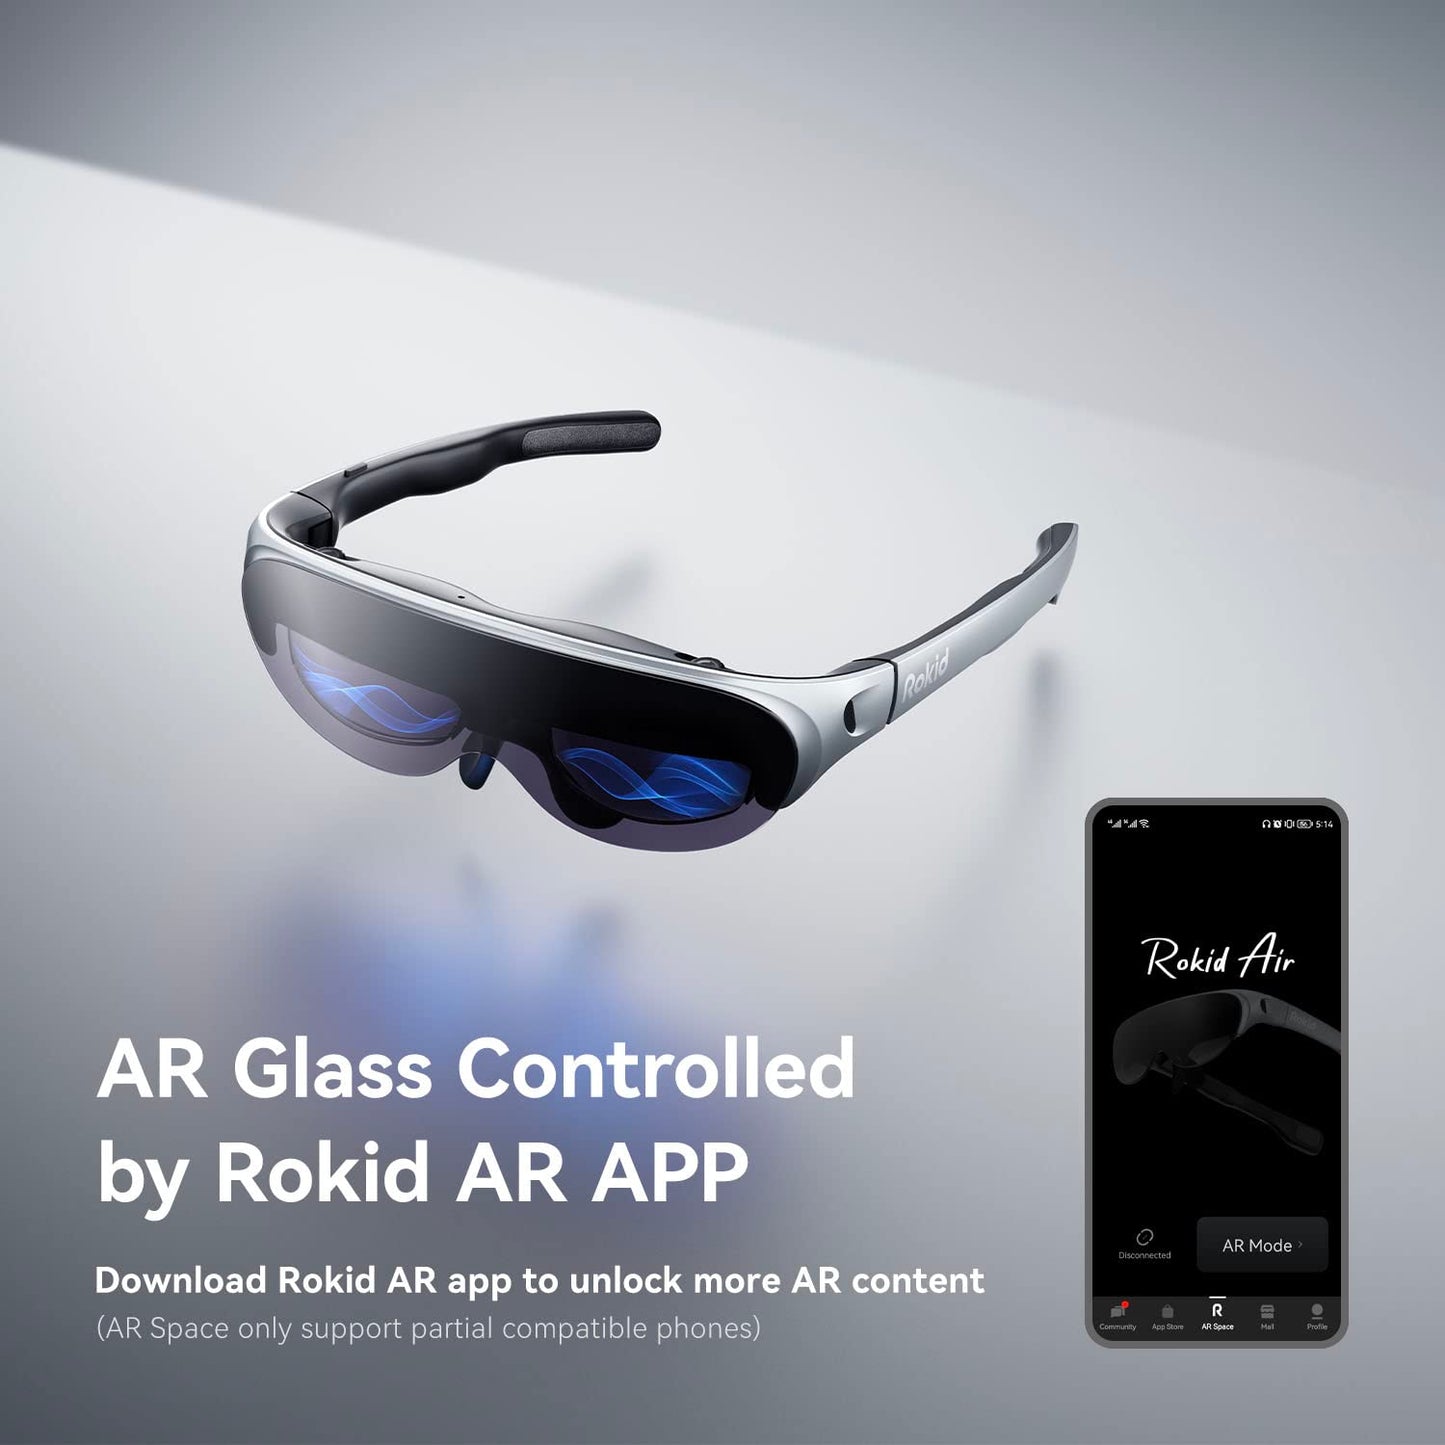 Rokid Air AR Glasses Augmented Reality Wearable Tech Headsets Smart Portable Massive Screen 1080P Dual Display,43°FoV, 55PPD